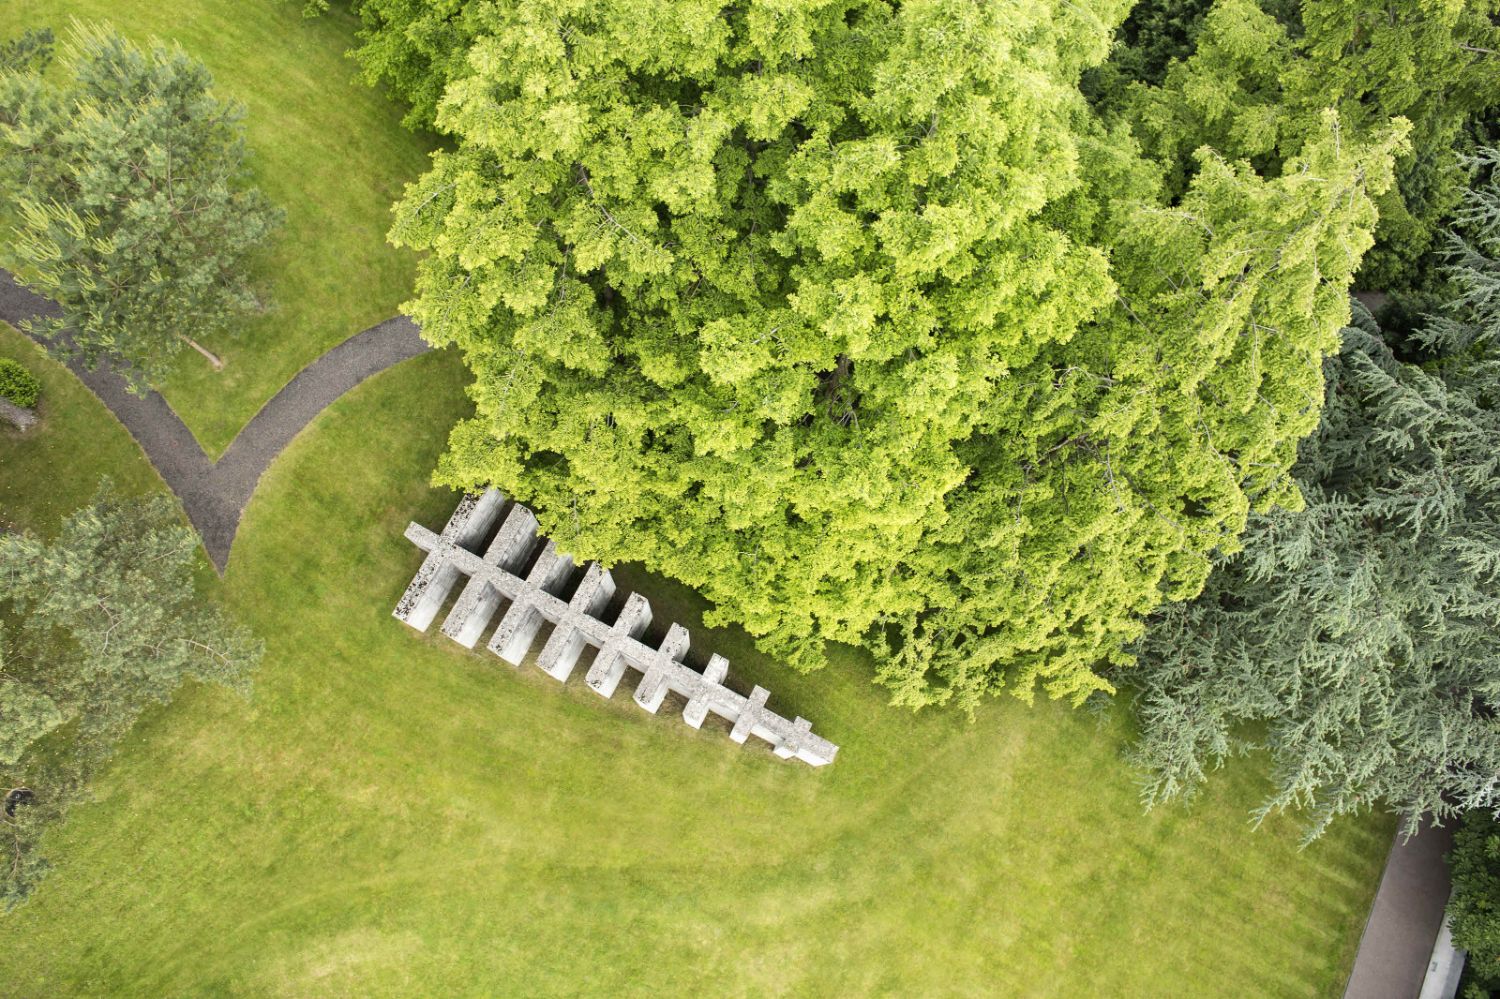 Bird's eye view of a concrete sculpture among green grass and trees.